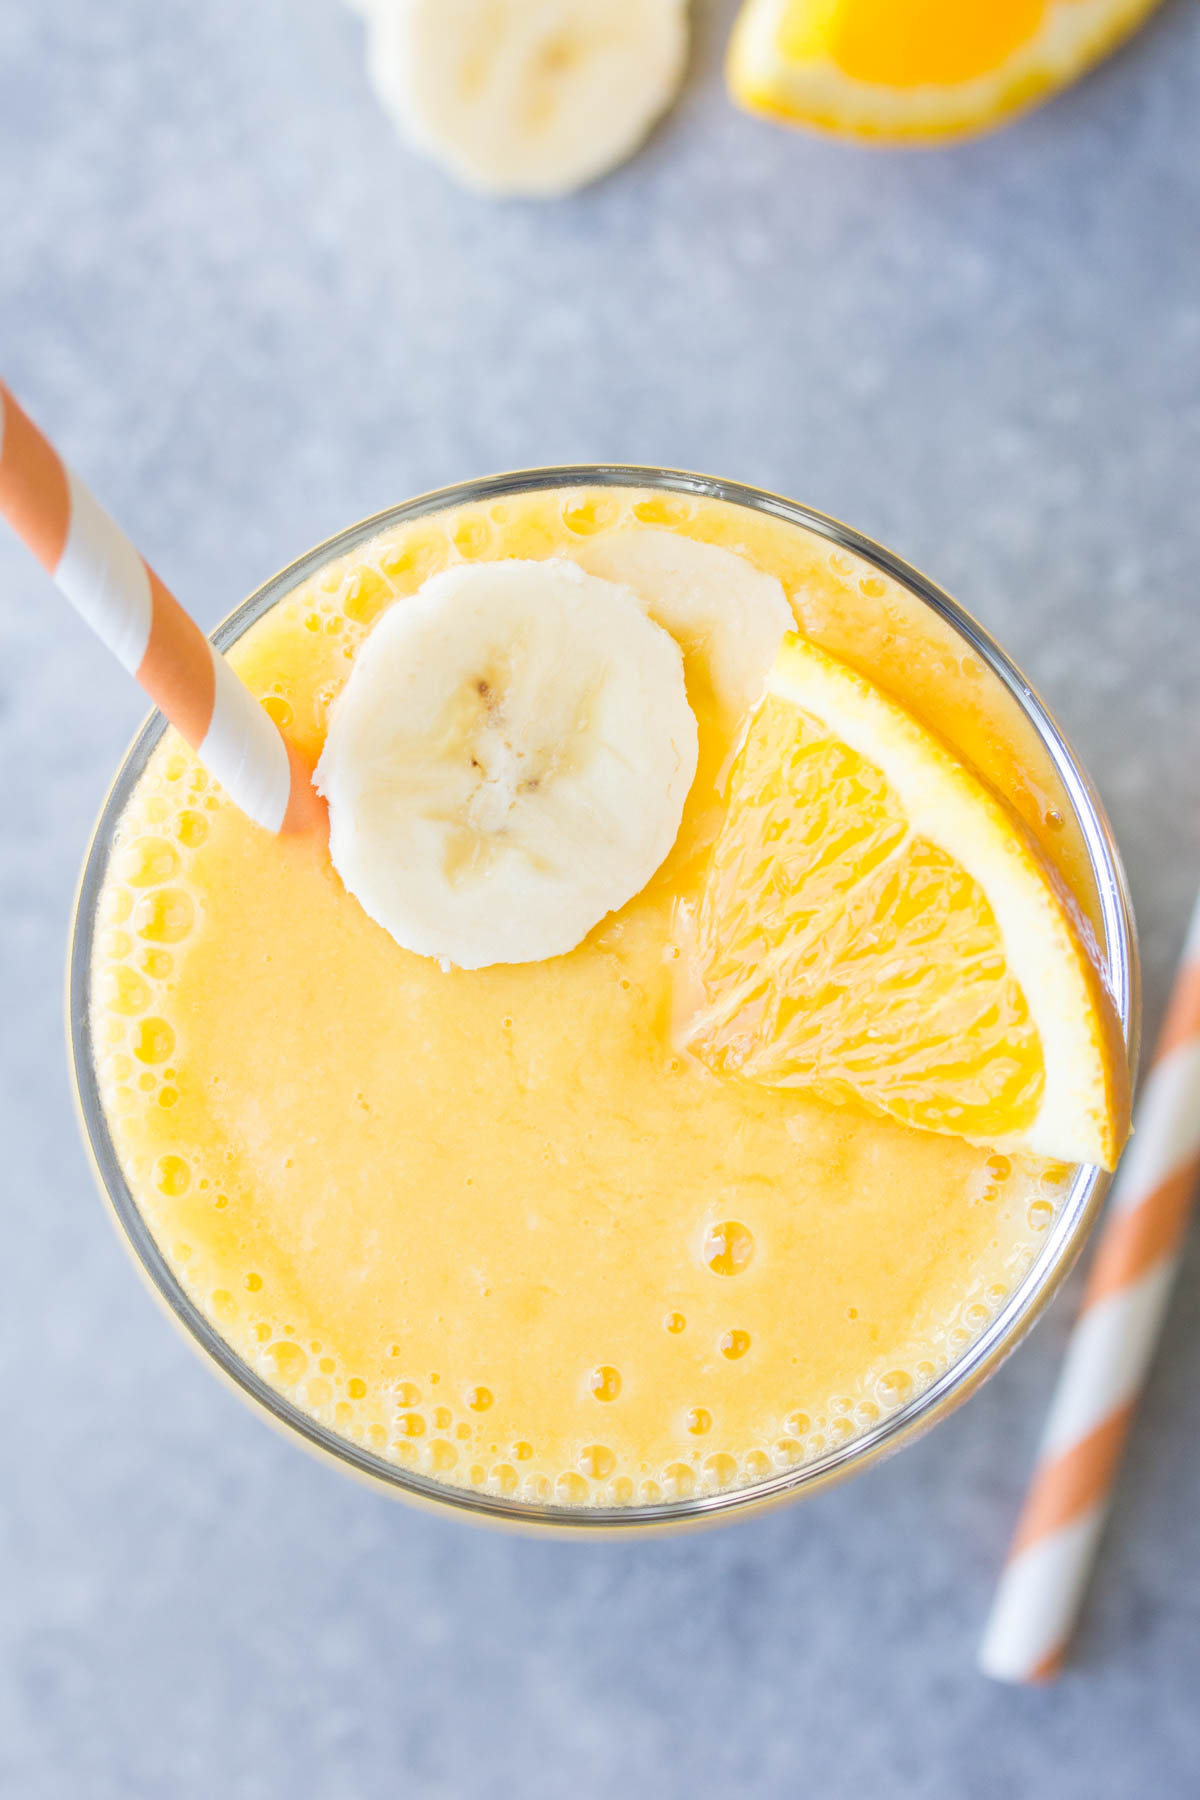 Overhead view of orange smoothie in glass with straw, banana slice and orange wedge.